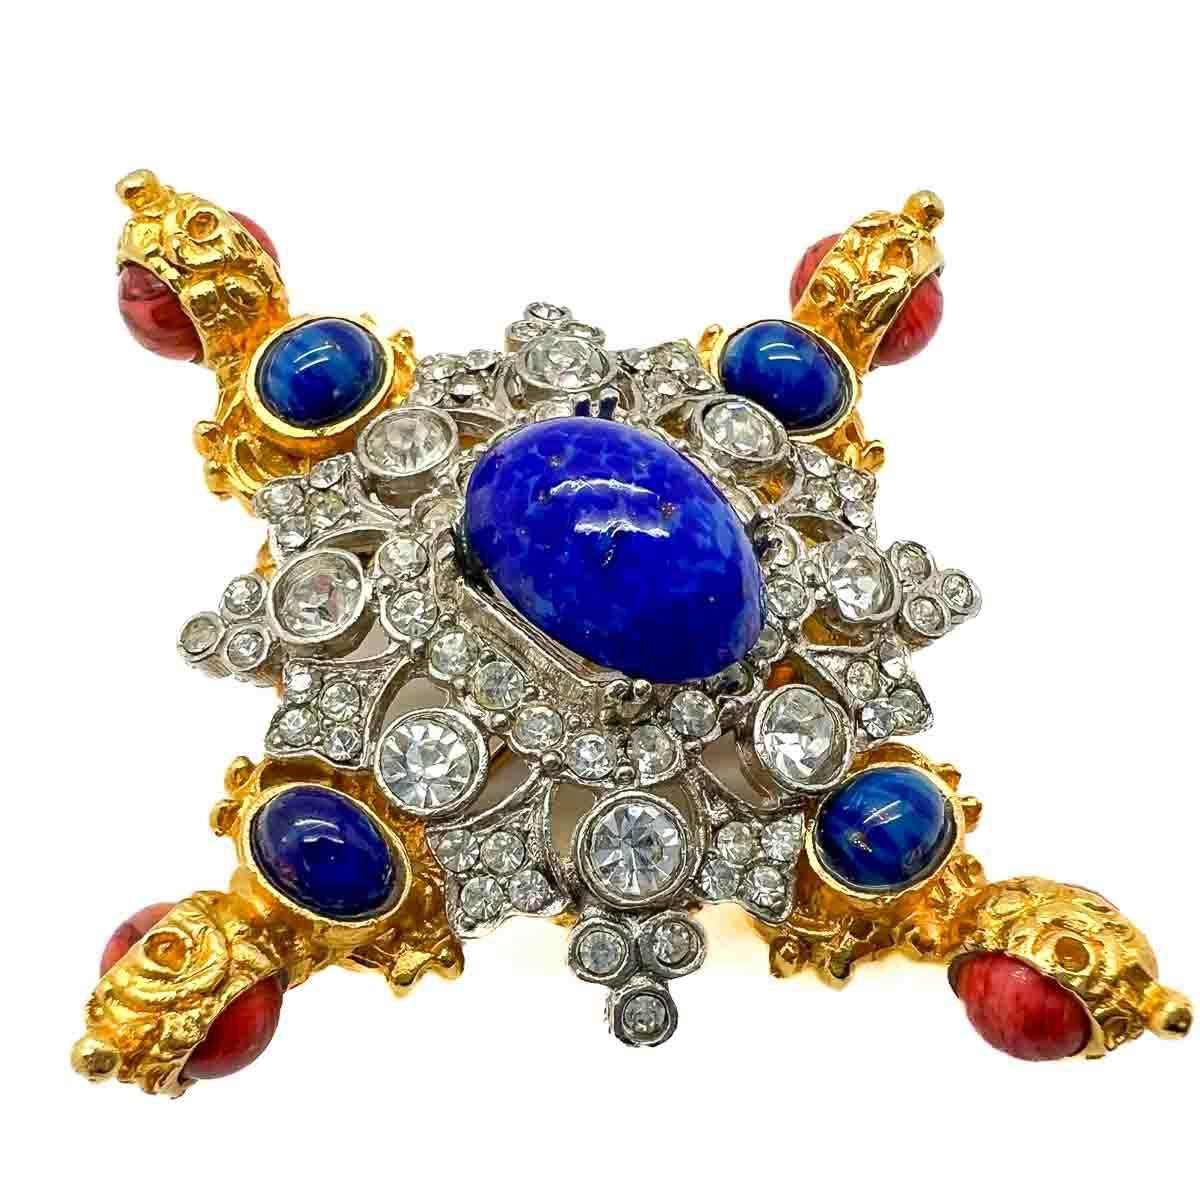 A spectacular Vintage Kenneth Jay Lane Jewelled Cruciform Brooch. A lavish cruciform inspired design is richly embellished with lapis and coral glass cabochons and finished with pave chaton crystals. Rich, opulent and eternally stylish, this work of